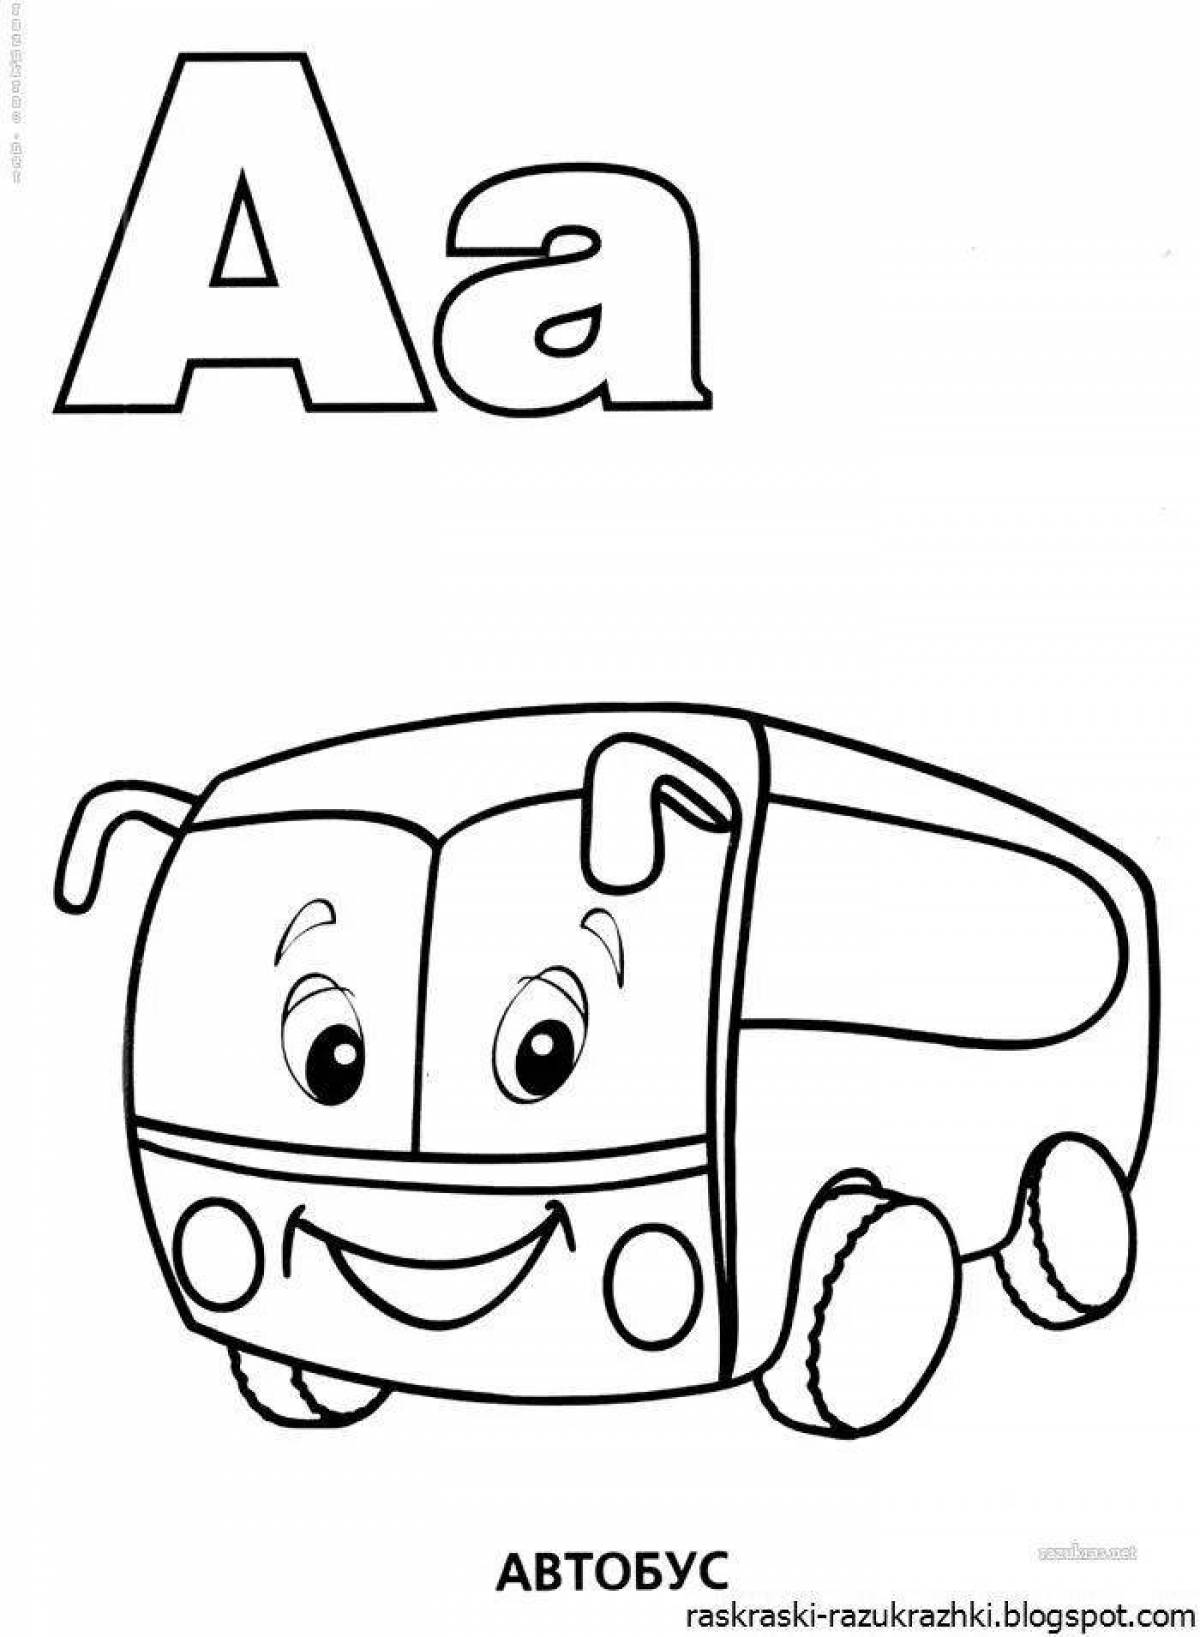 Fun coloring letters for children 3-4 years old